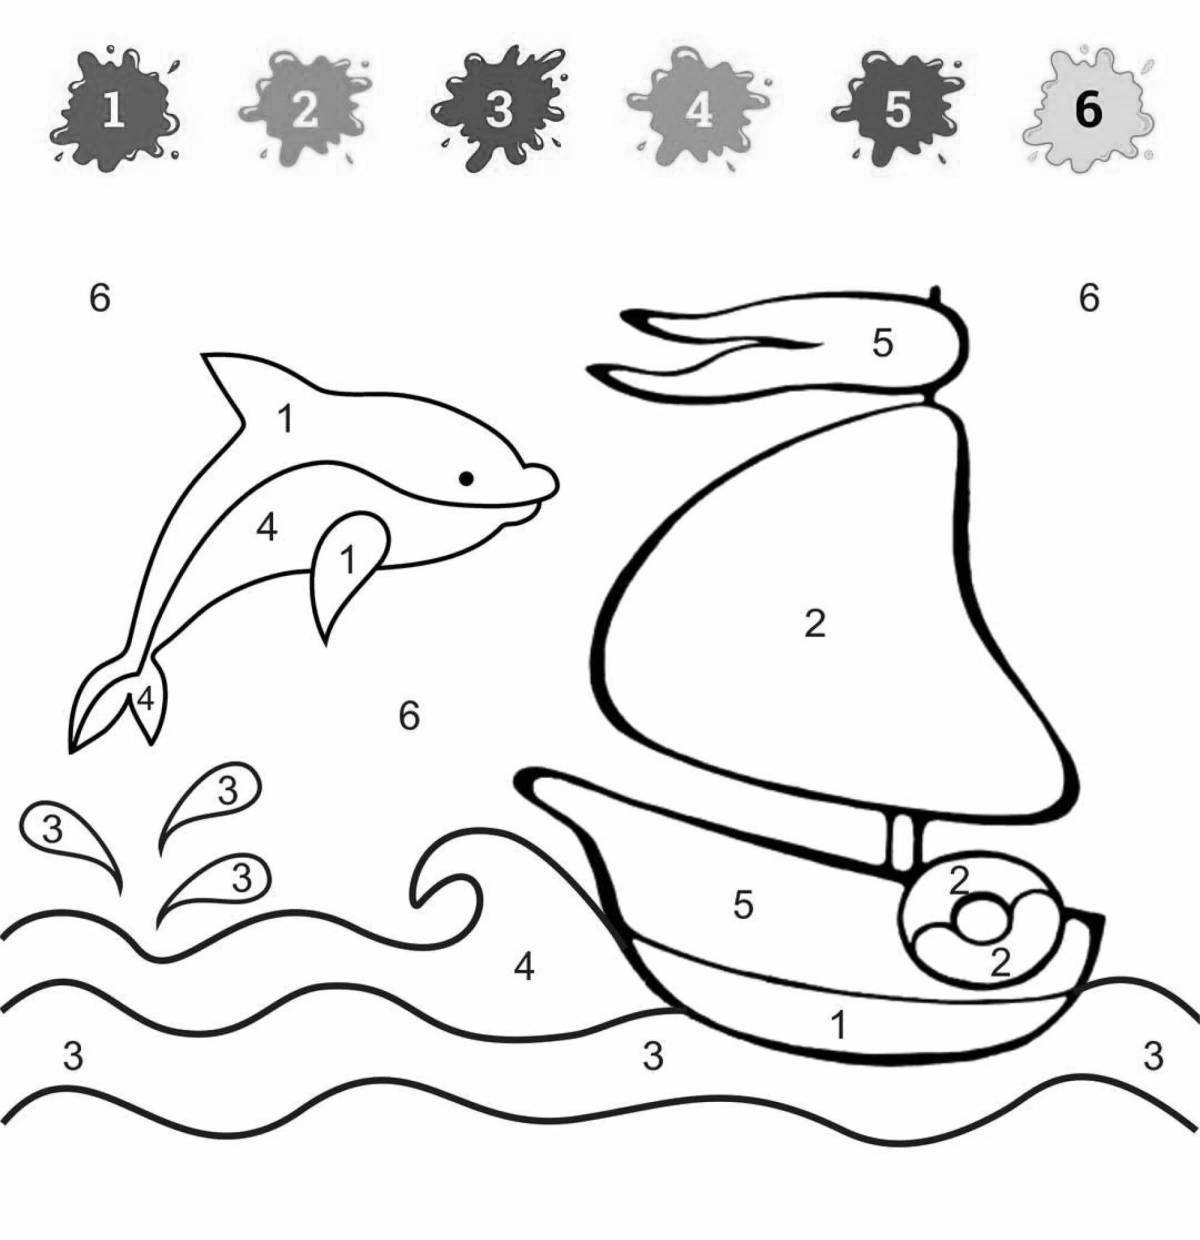 Fun math coloring book for 3-4 year olds